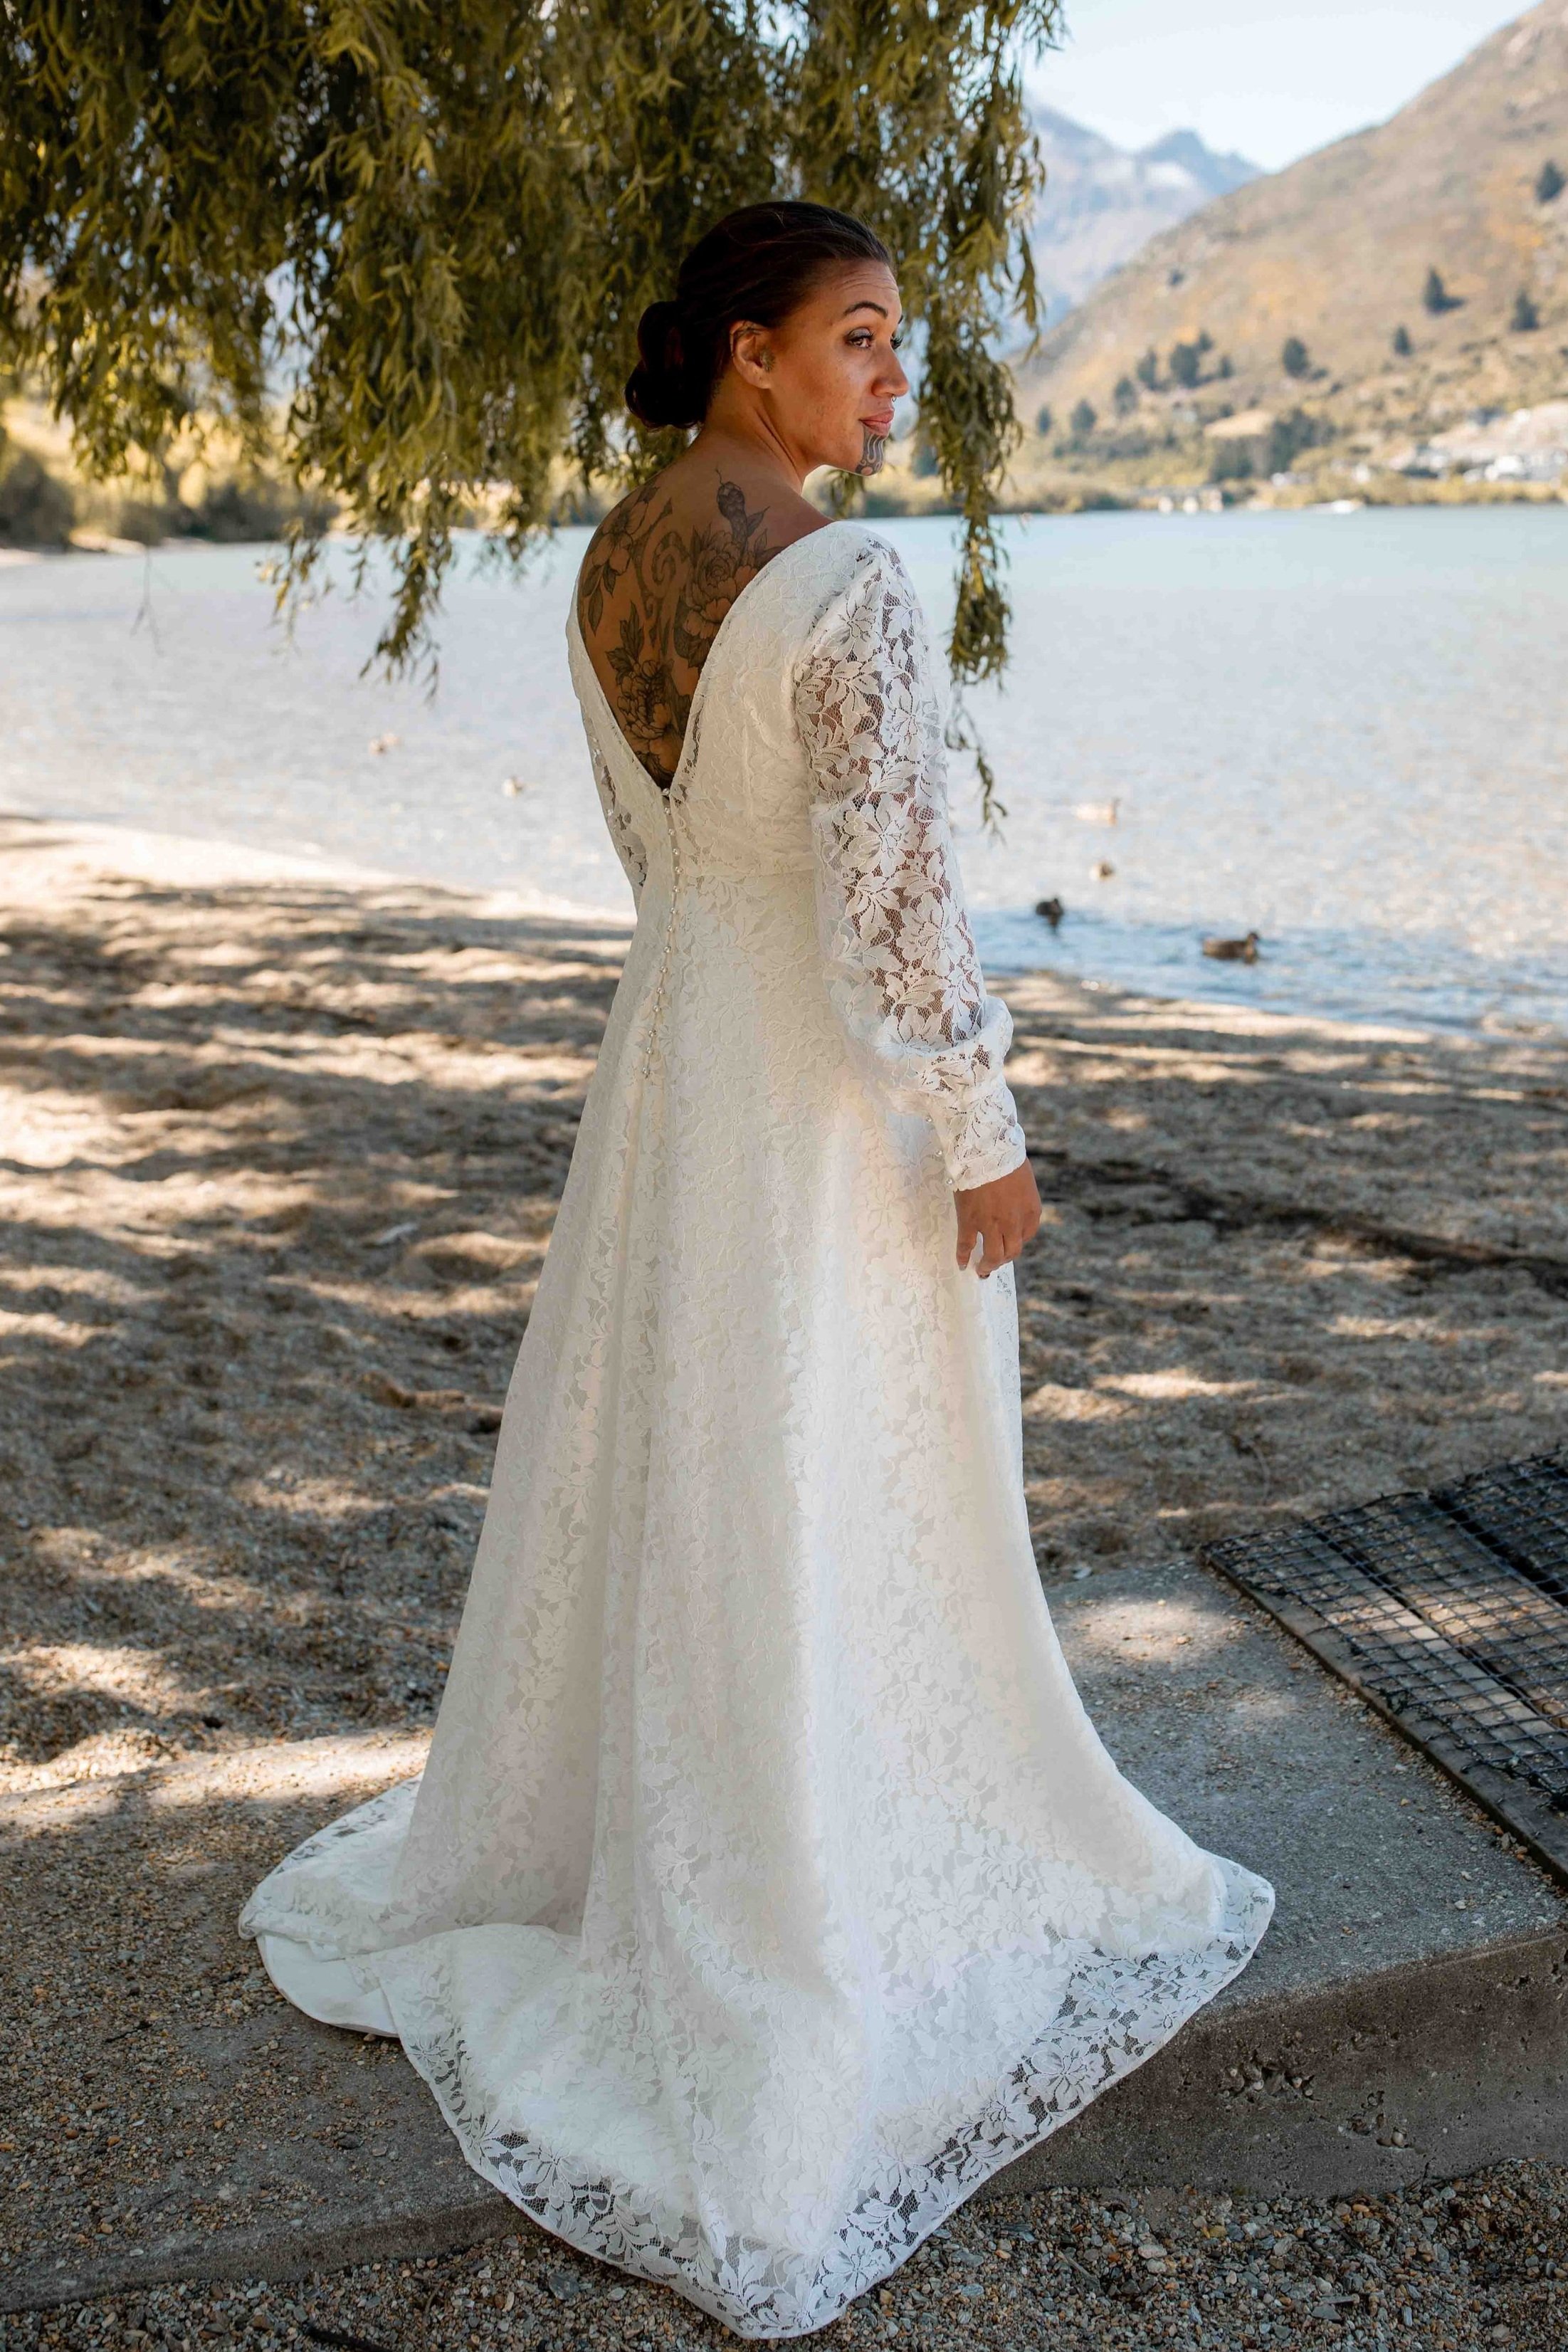 Madonna+Lace+Overlay+-+Nemo+Bridal+Couture+Queenstown+New+Zealand+0V9A3101.jpg